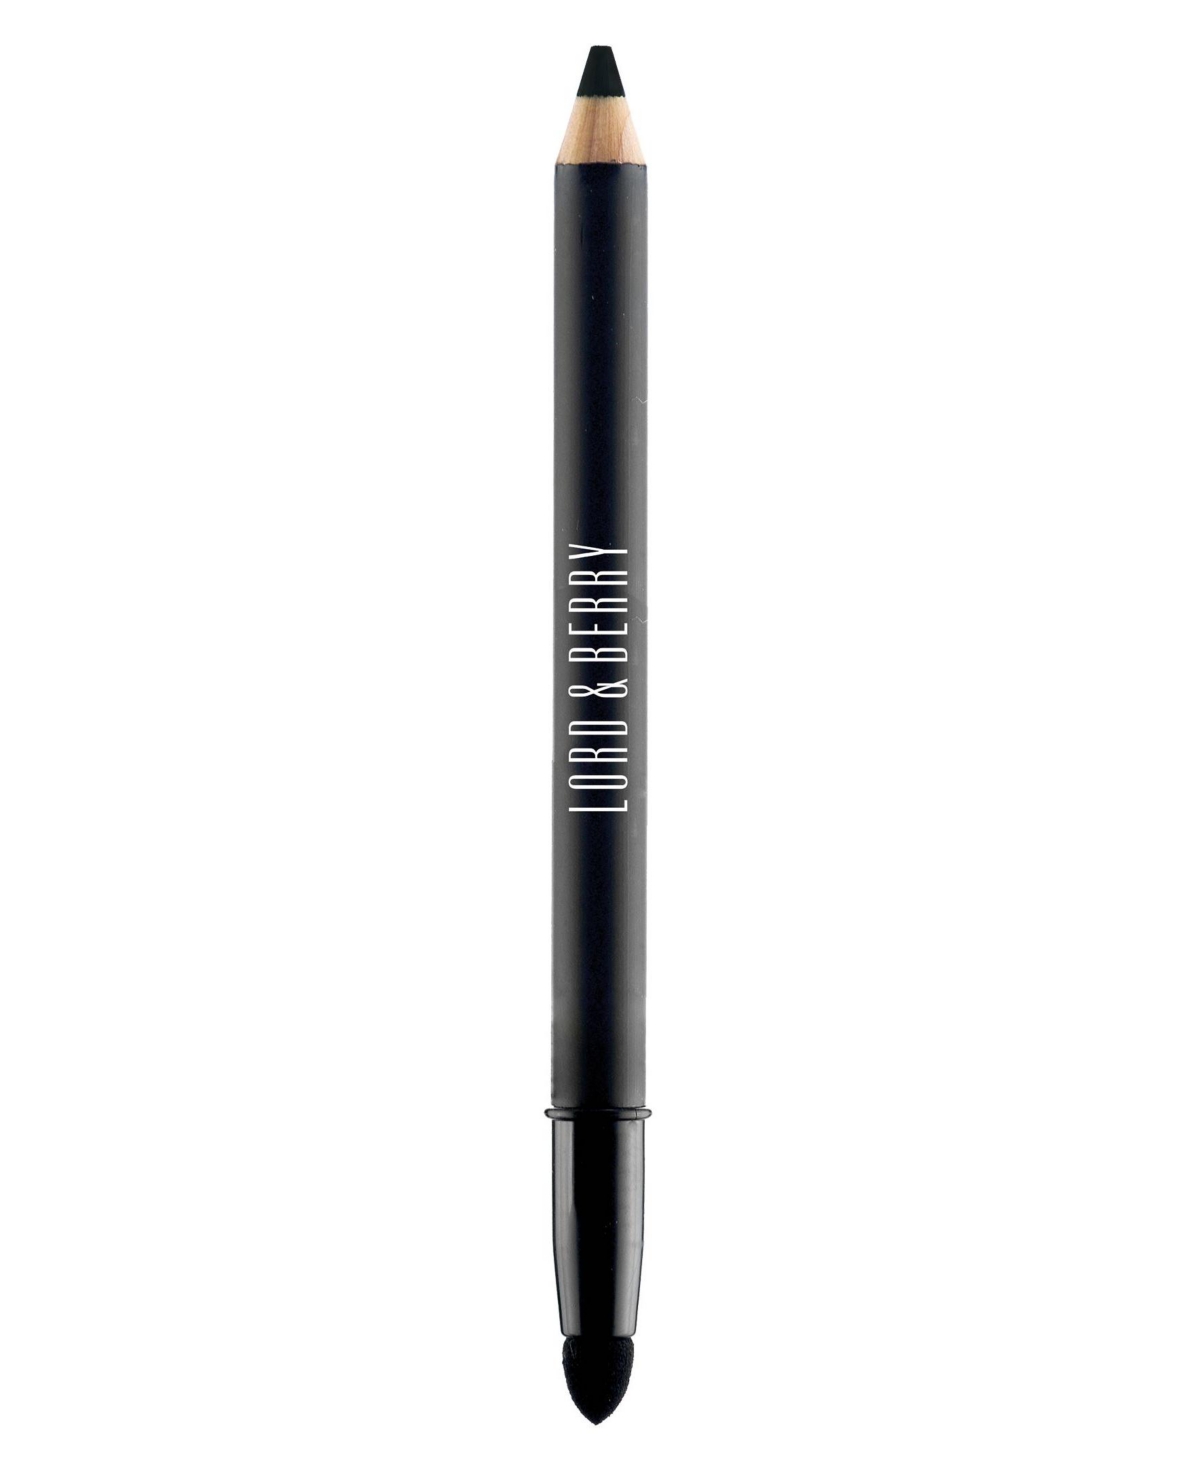 Lord & Berry Velluto Eye Liner Shadow, 0.024 oz